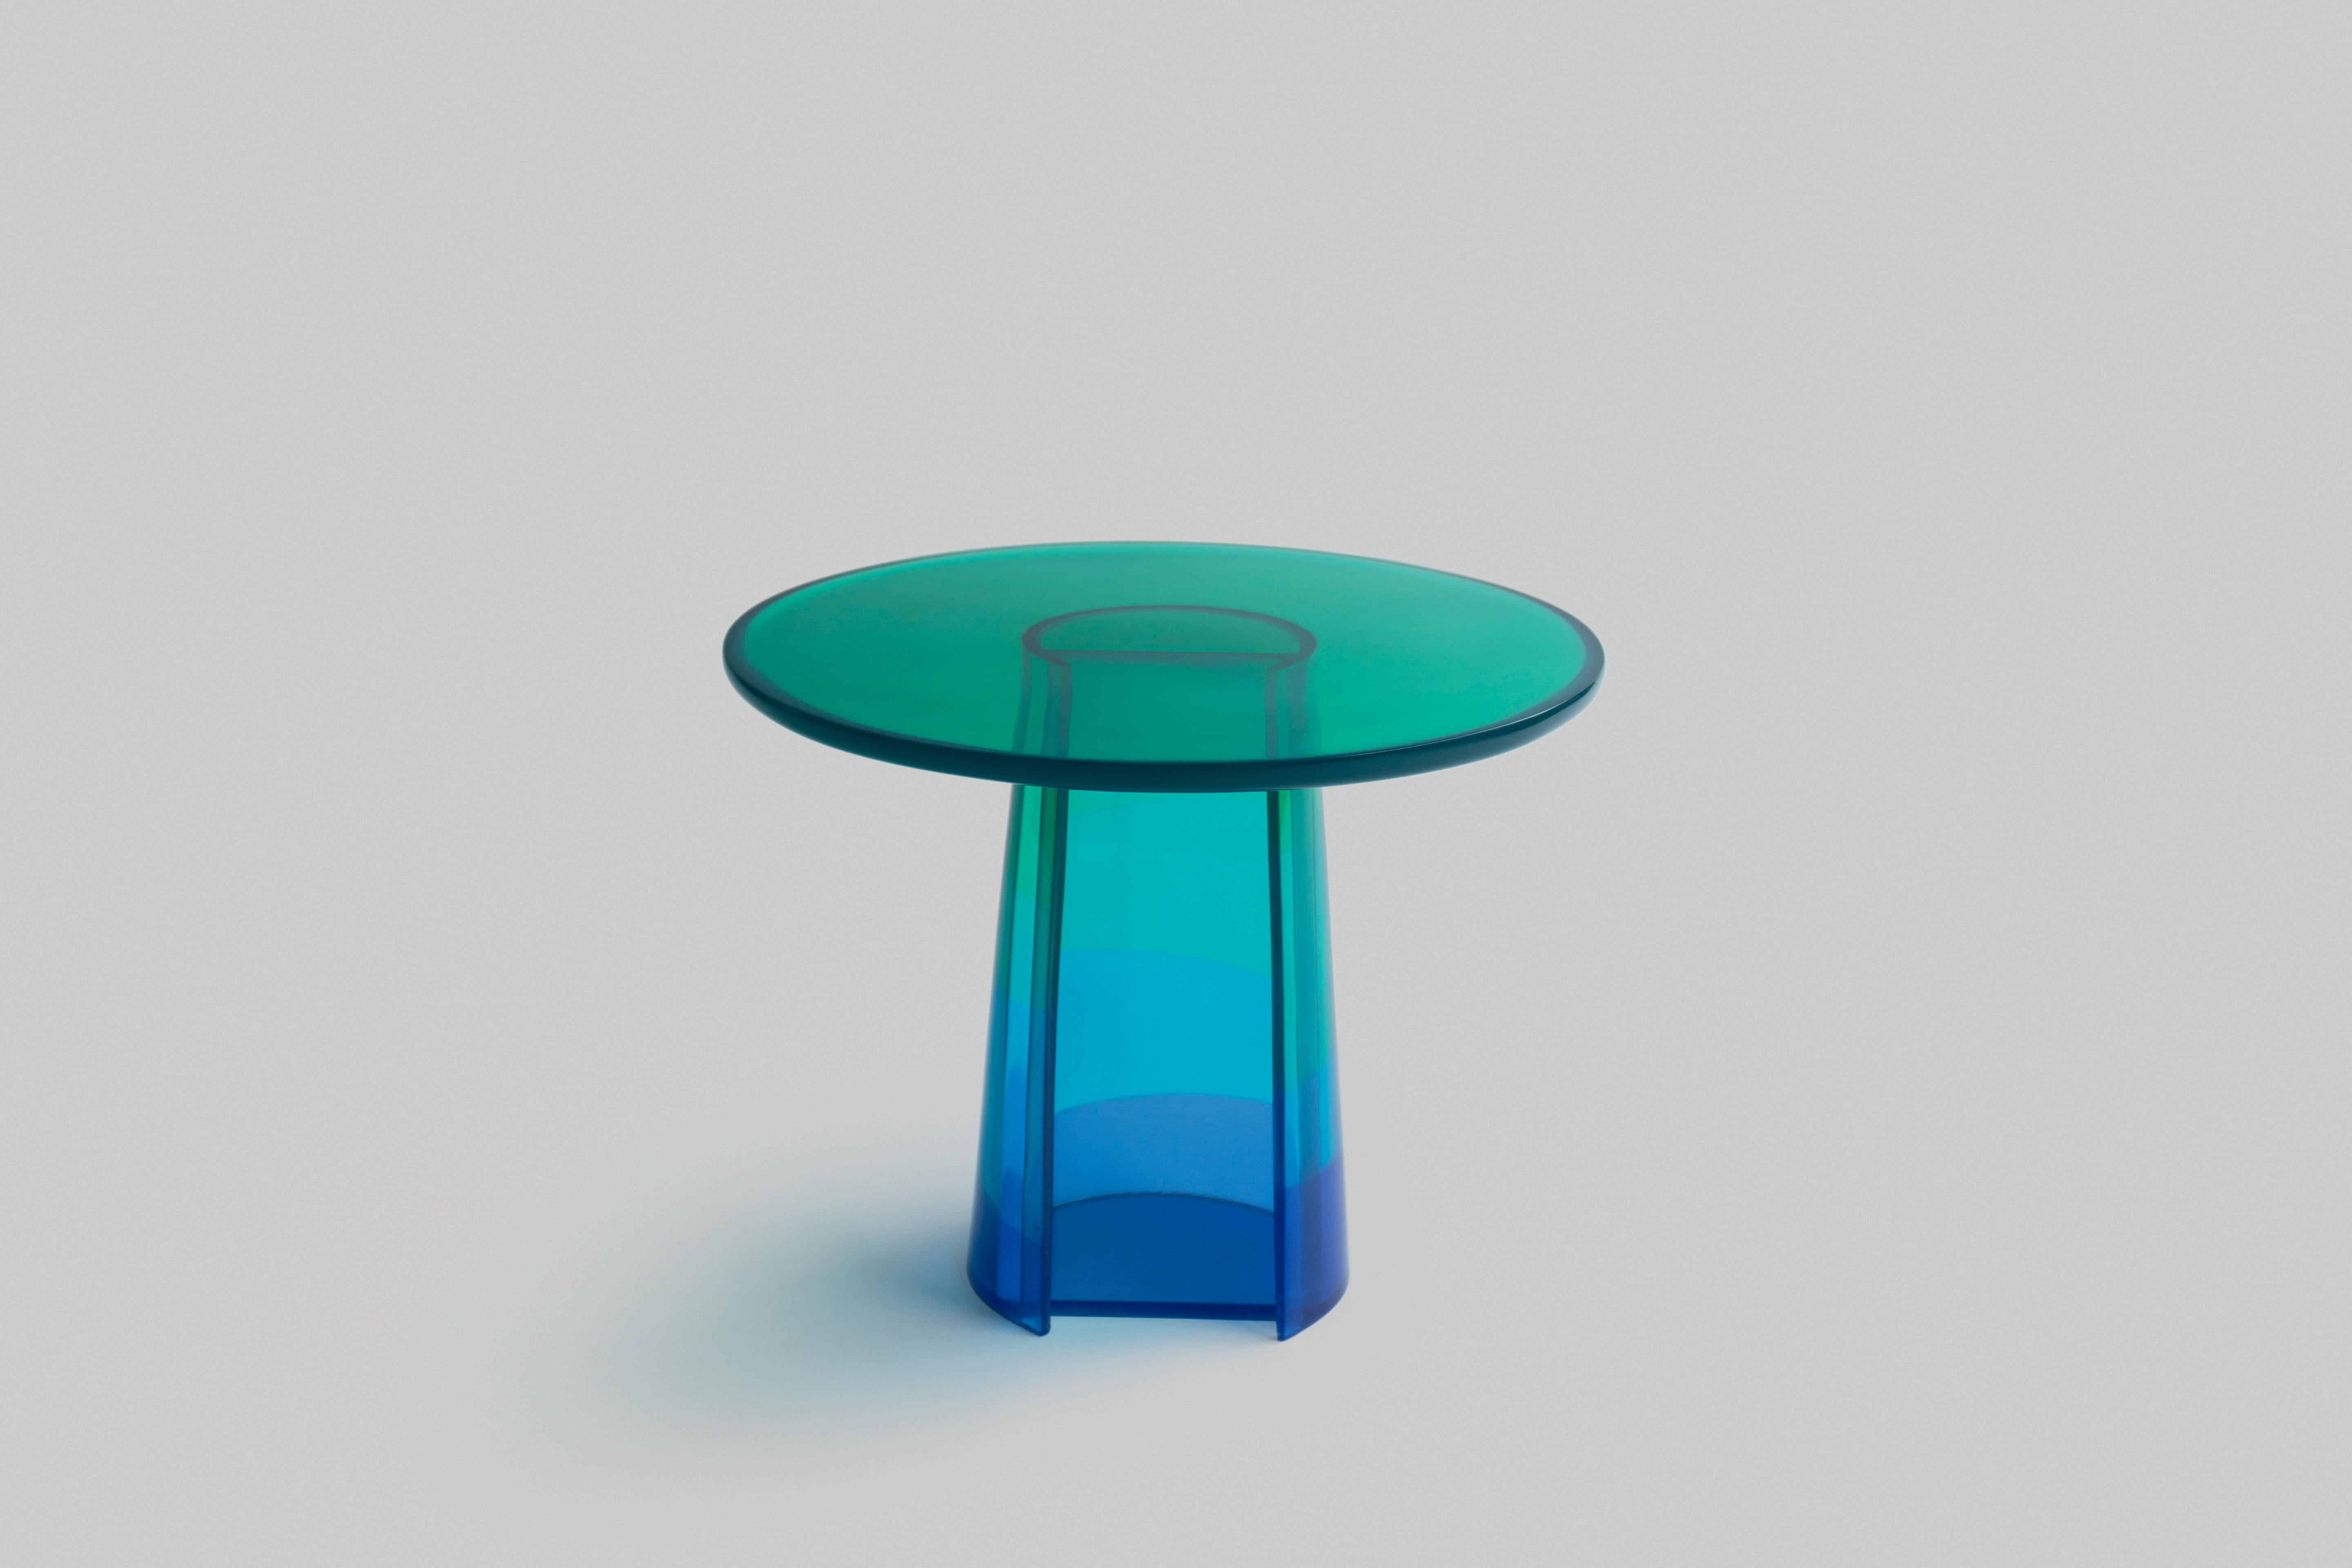 The Malta collection is composed of three side tables with soft lines and curves, inspired by the colors, depths, waves and tides of the Mediterranean Sea. 

We use resin as the main and unique Material in our pieces, as it is an extremely